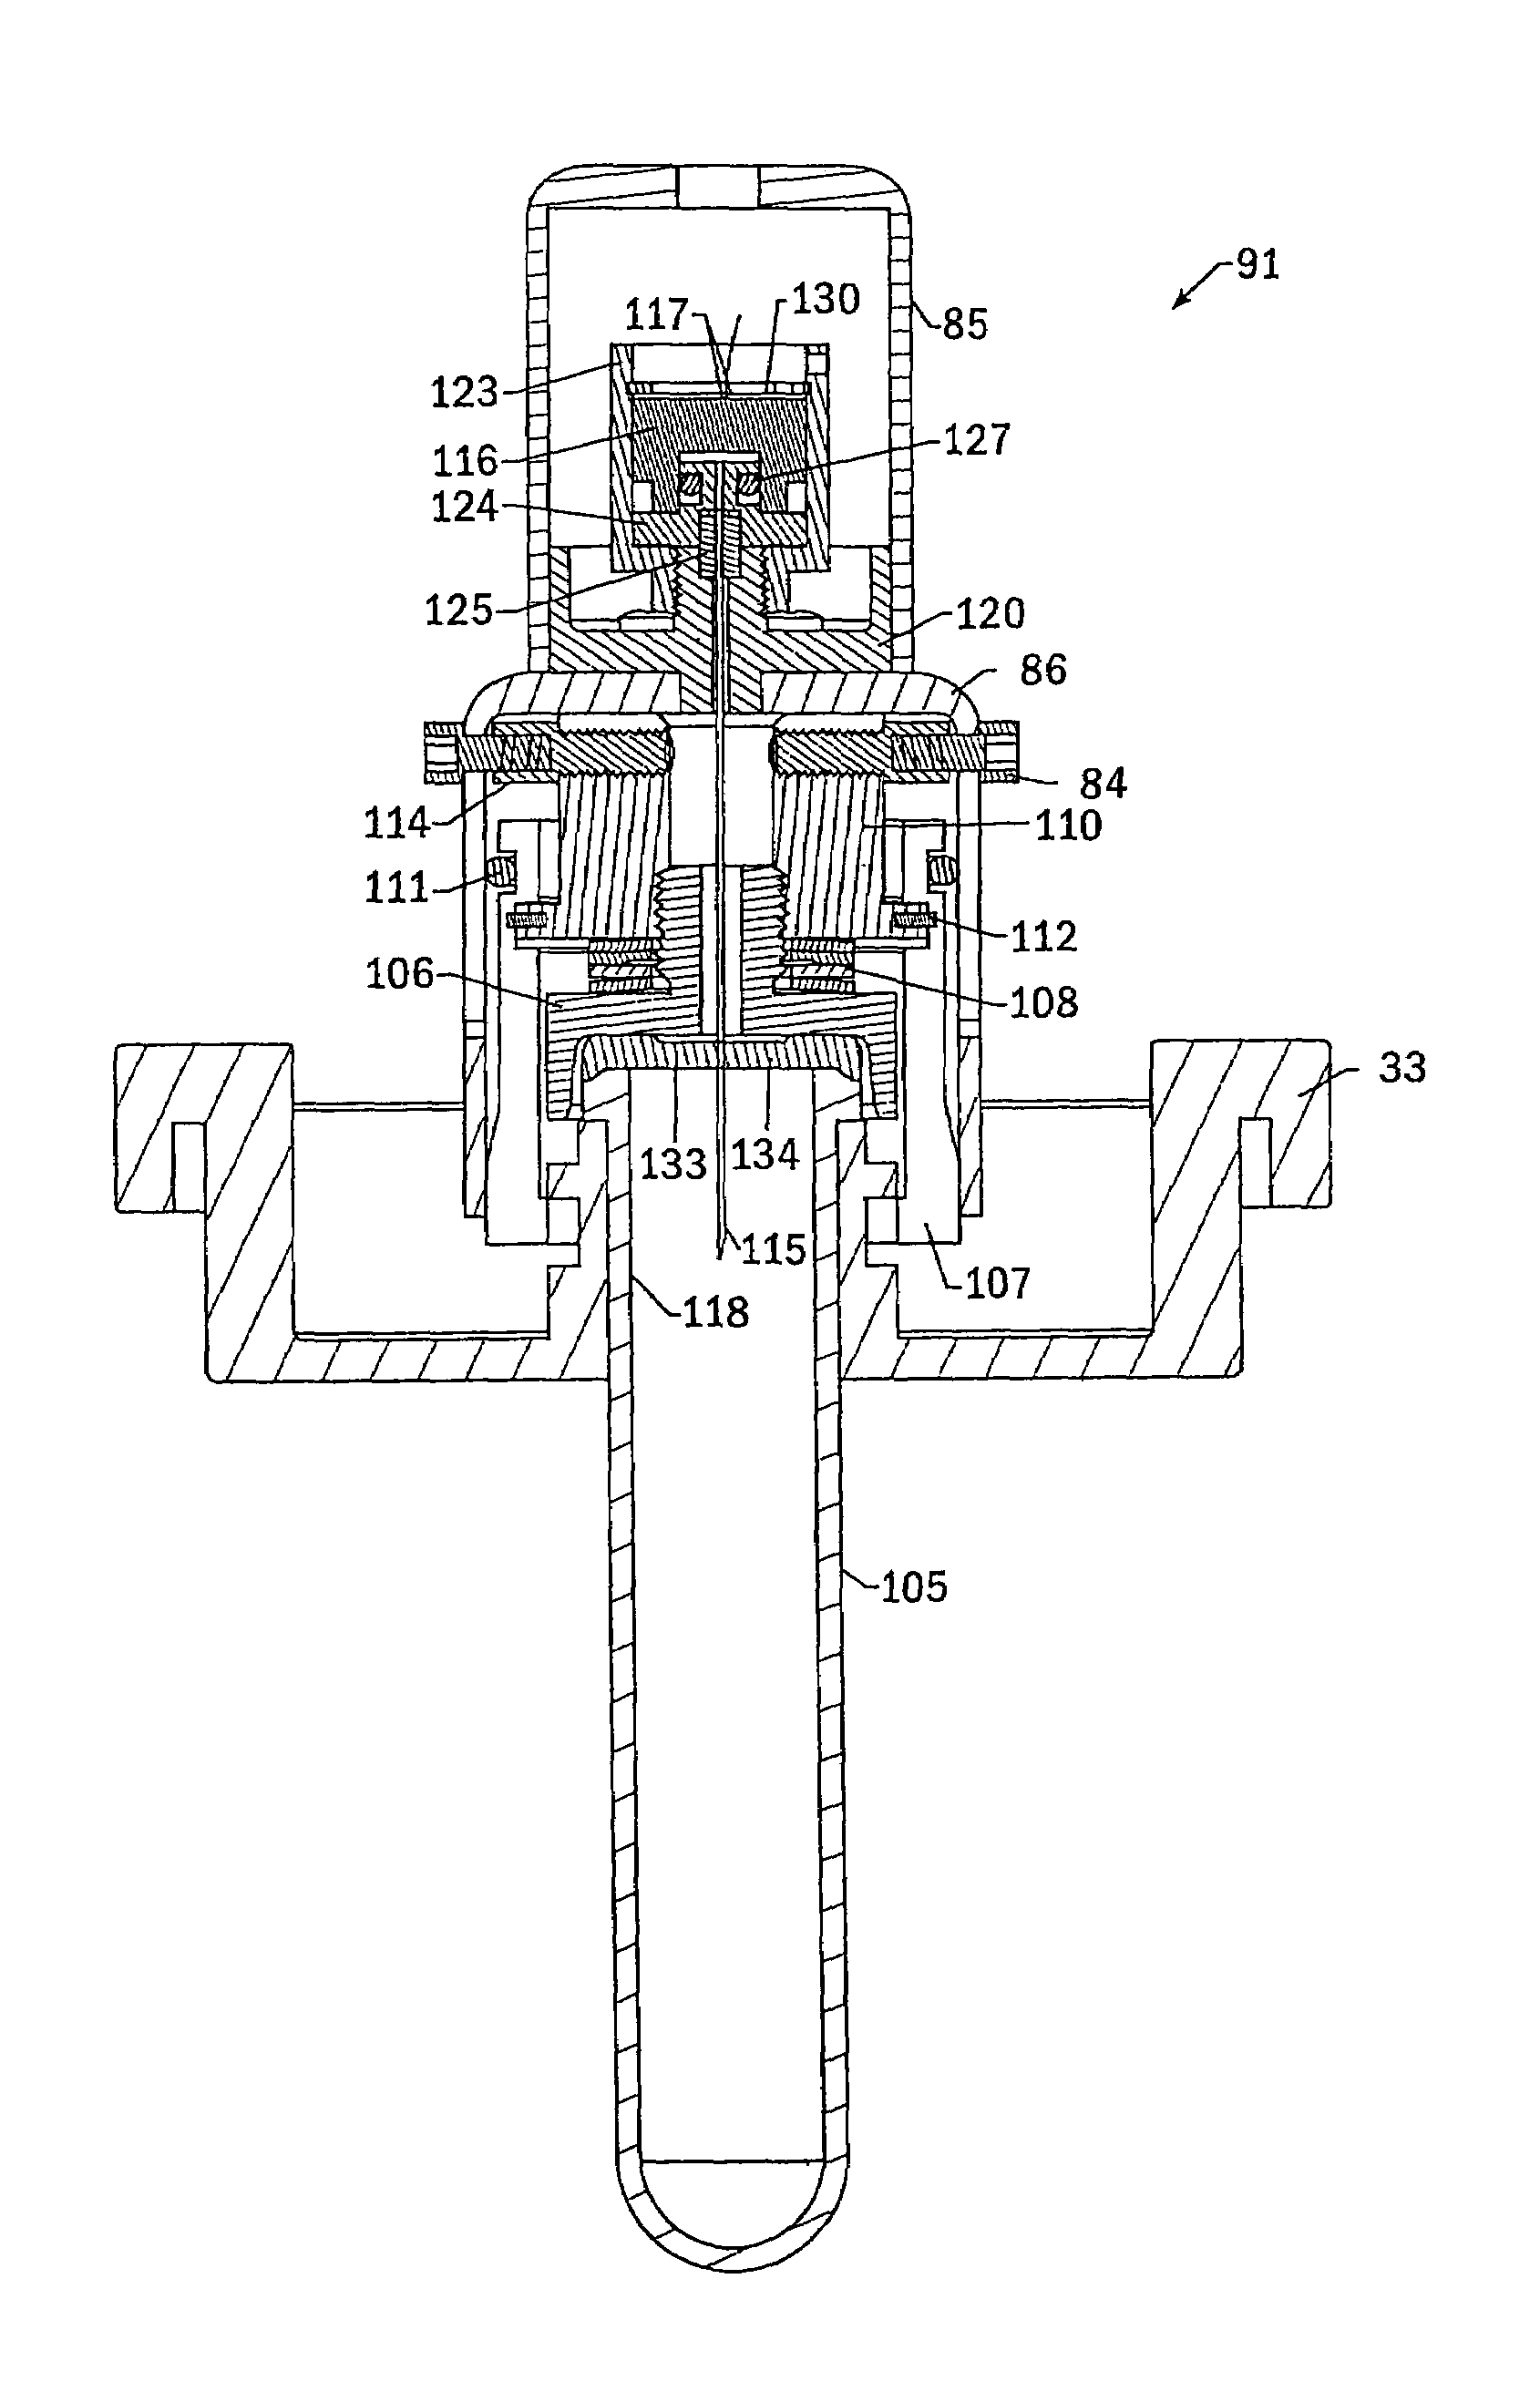 Pressure measurement in microwave-assisted chemical synthesis